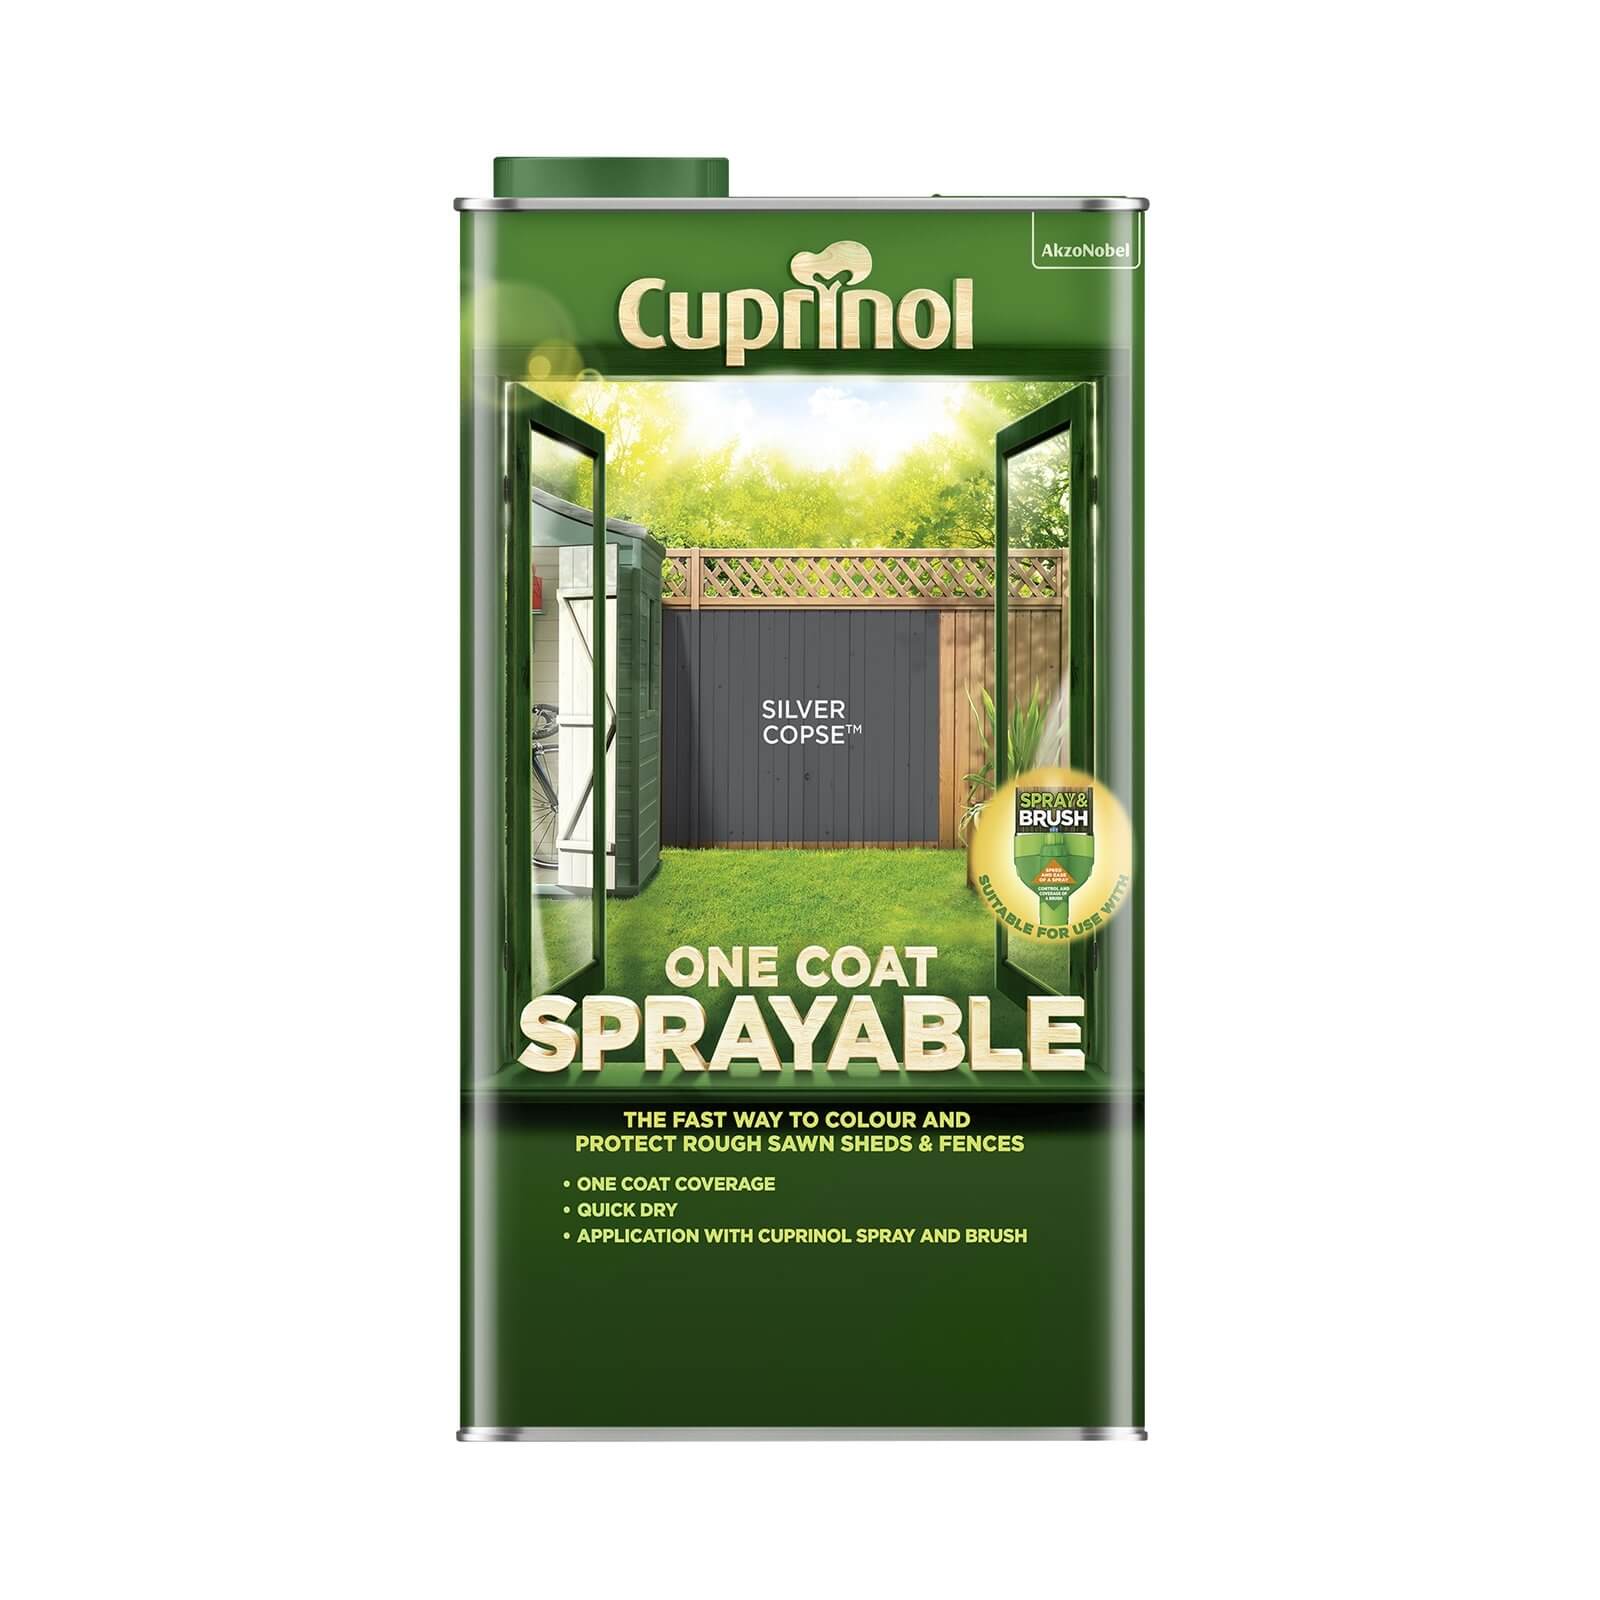 Photo of Cuprinol One Coat Sprayable Shed & Fence Paint - Silver Copse - 5l